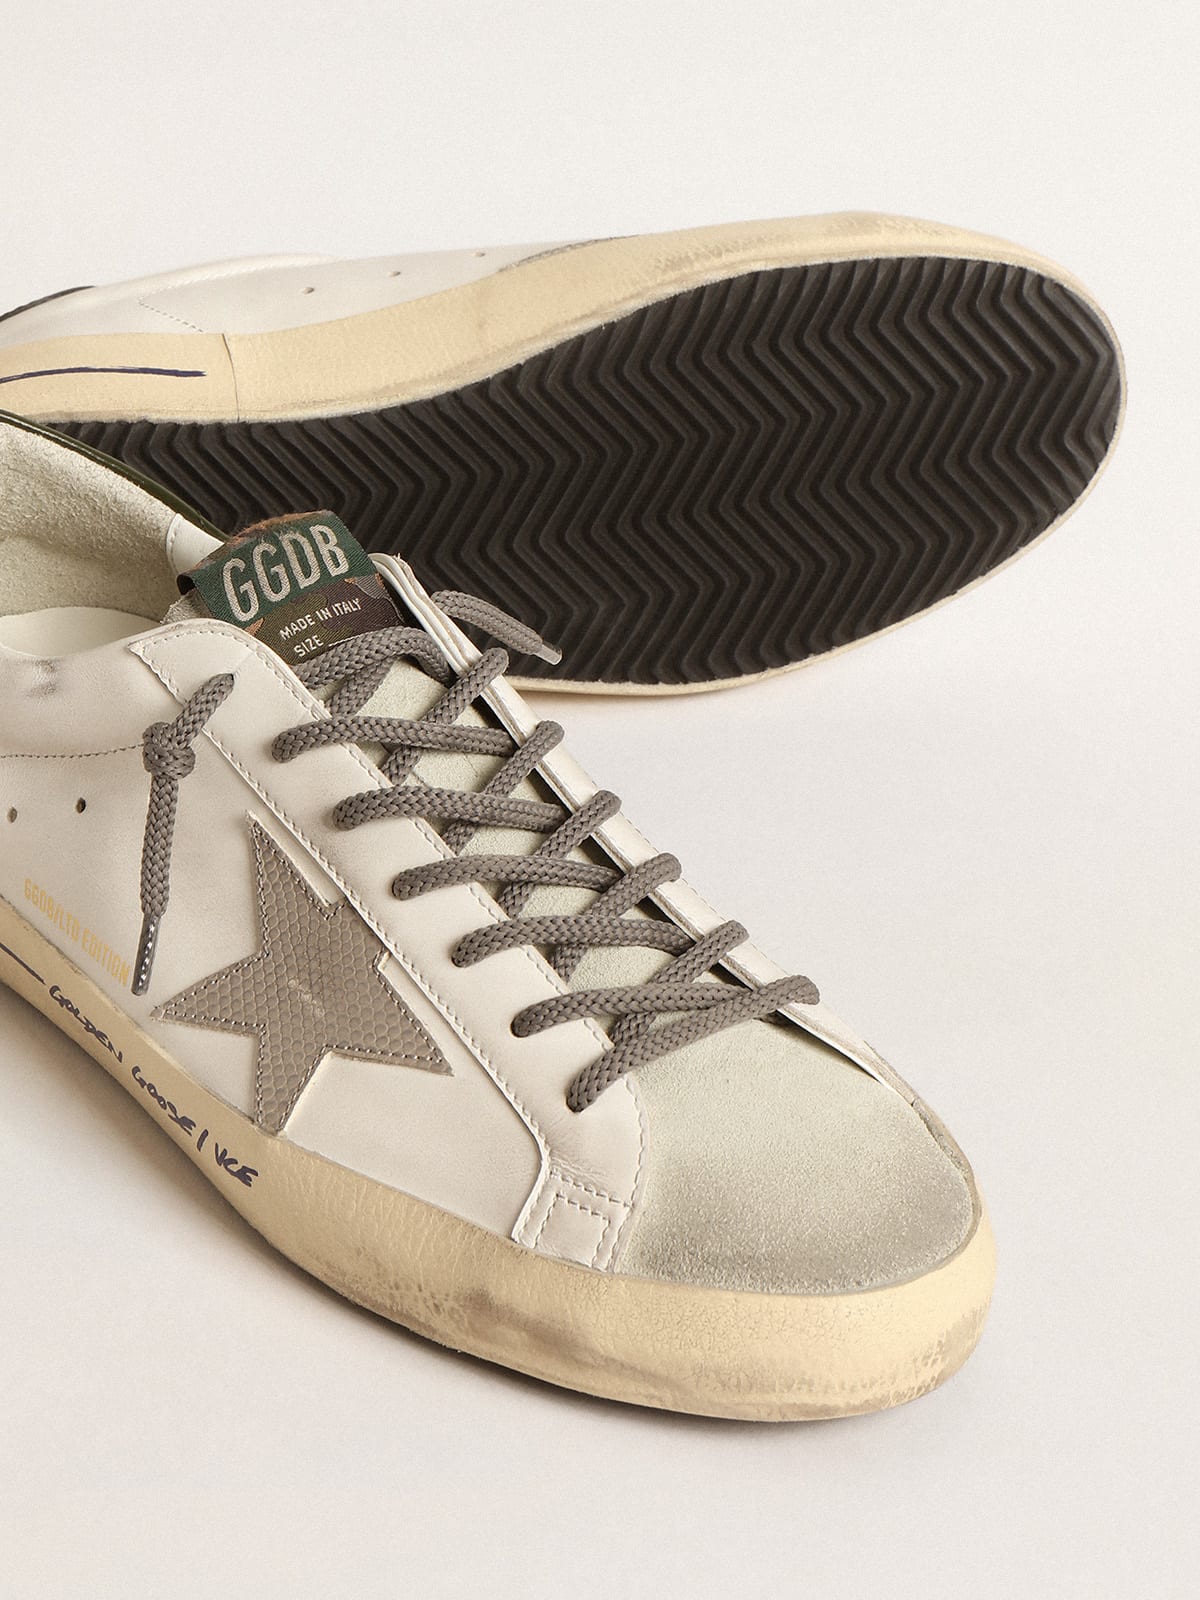 Golden Goose - Super-Star LTD with croc-print star and green heel tab in 